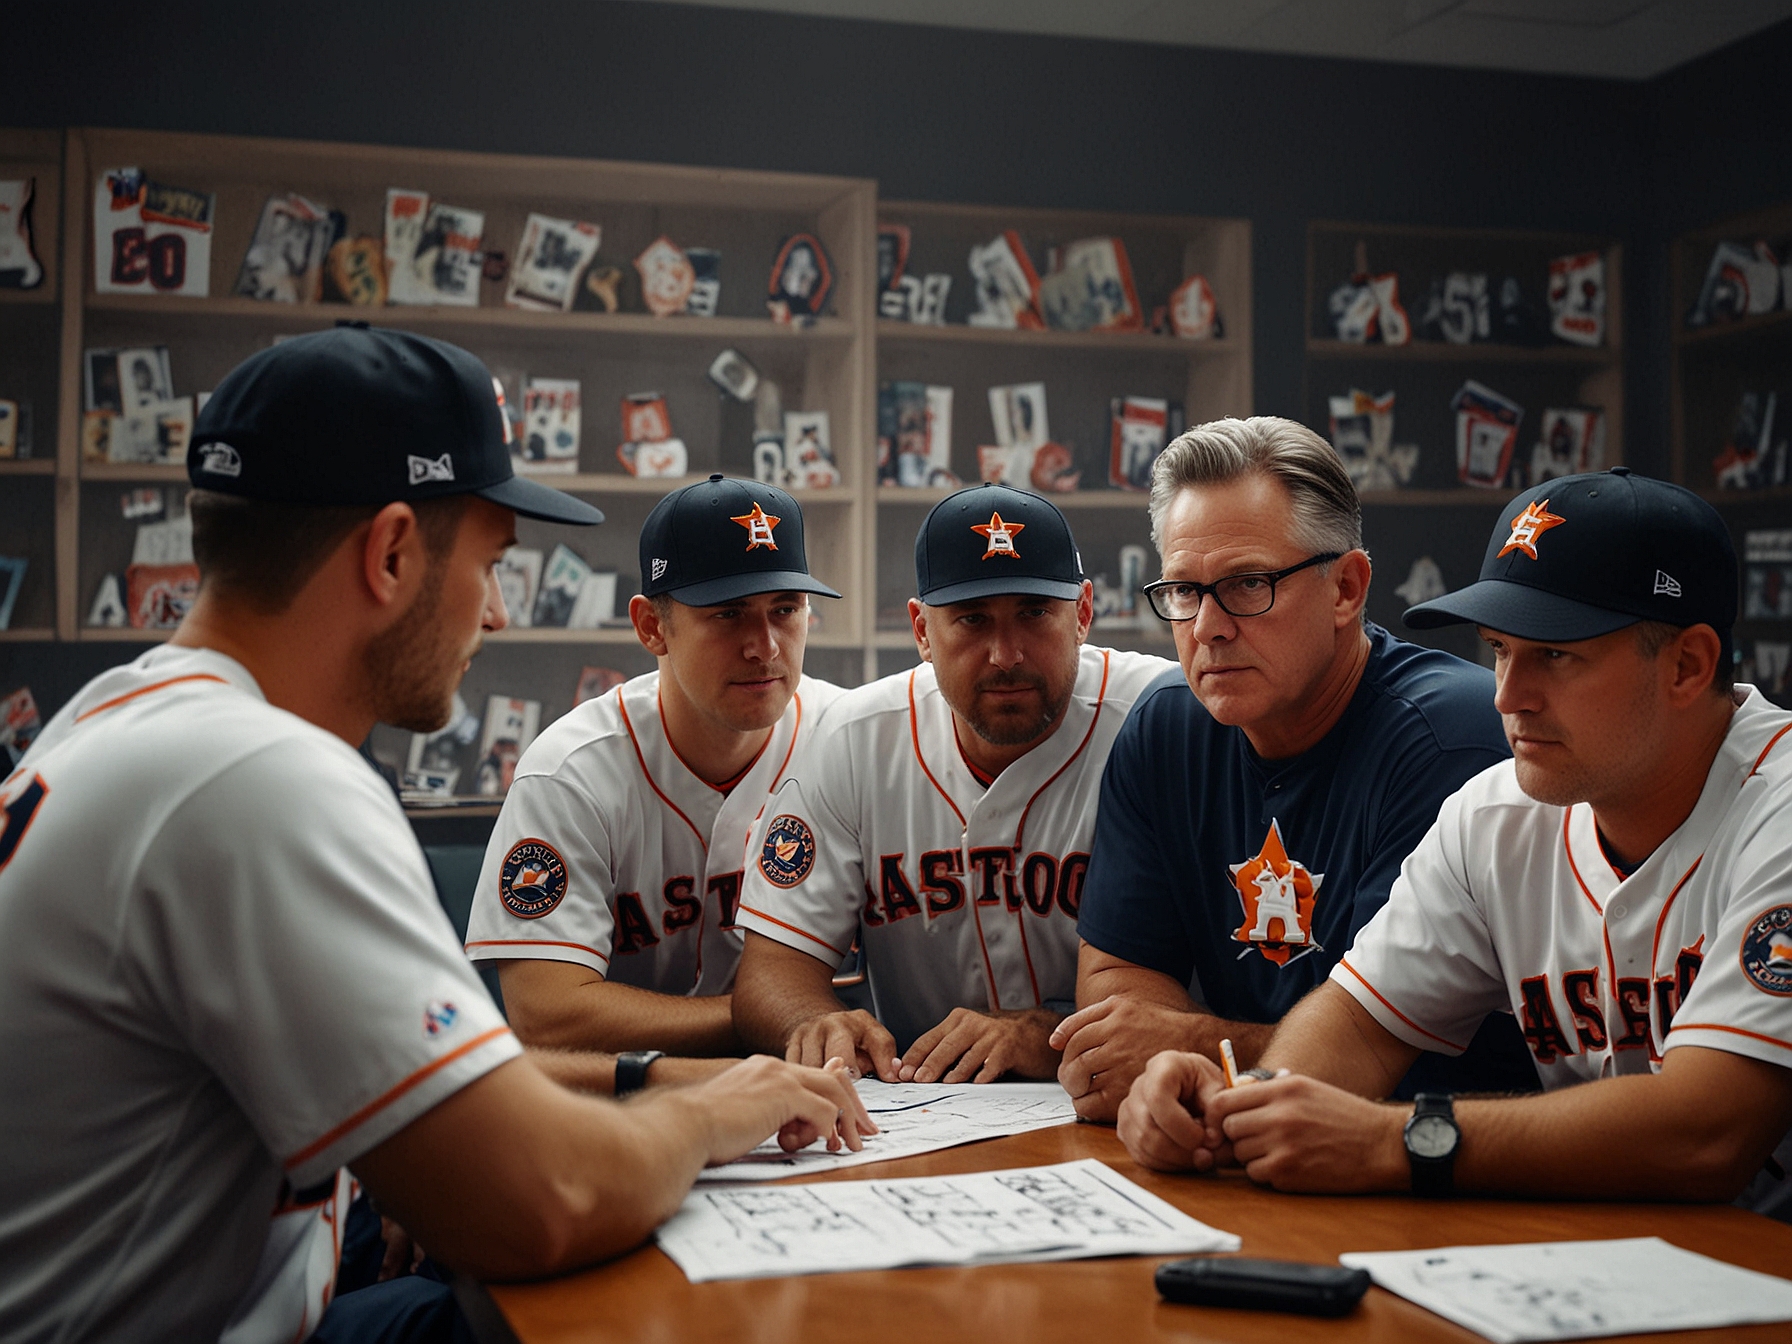 Astros' manager and coaching staff discuss strategy with Bryan King during a team meeting. His promotion reflects the team's confidence in integrating home-grown talent for a successful season.